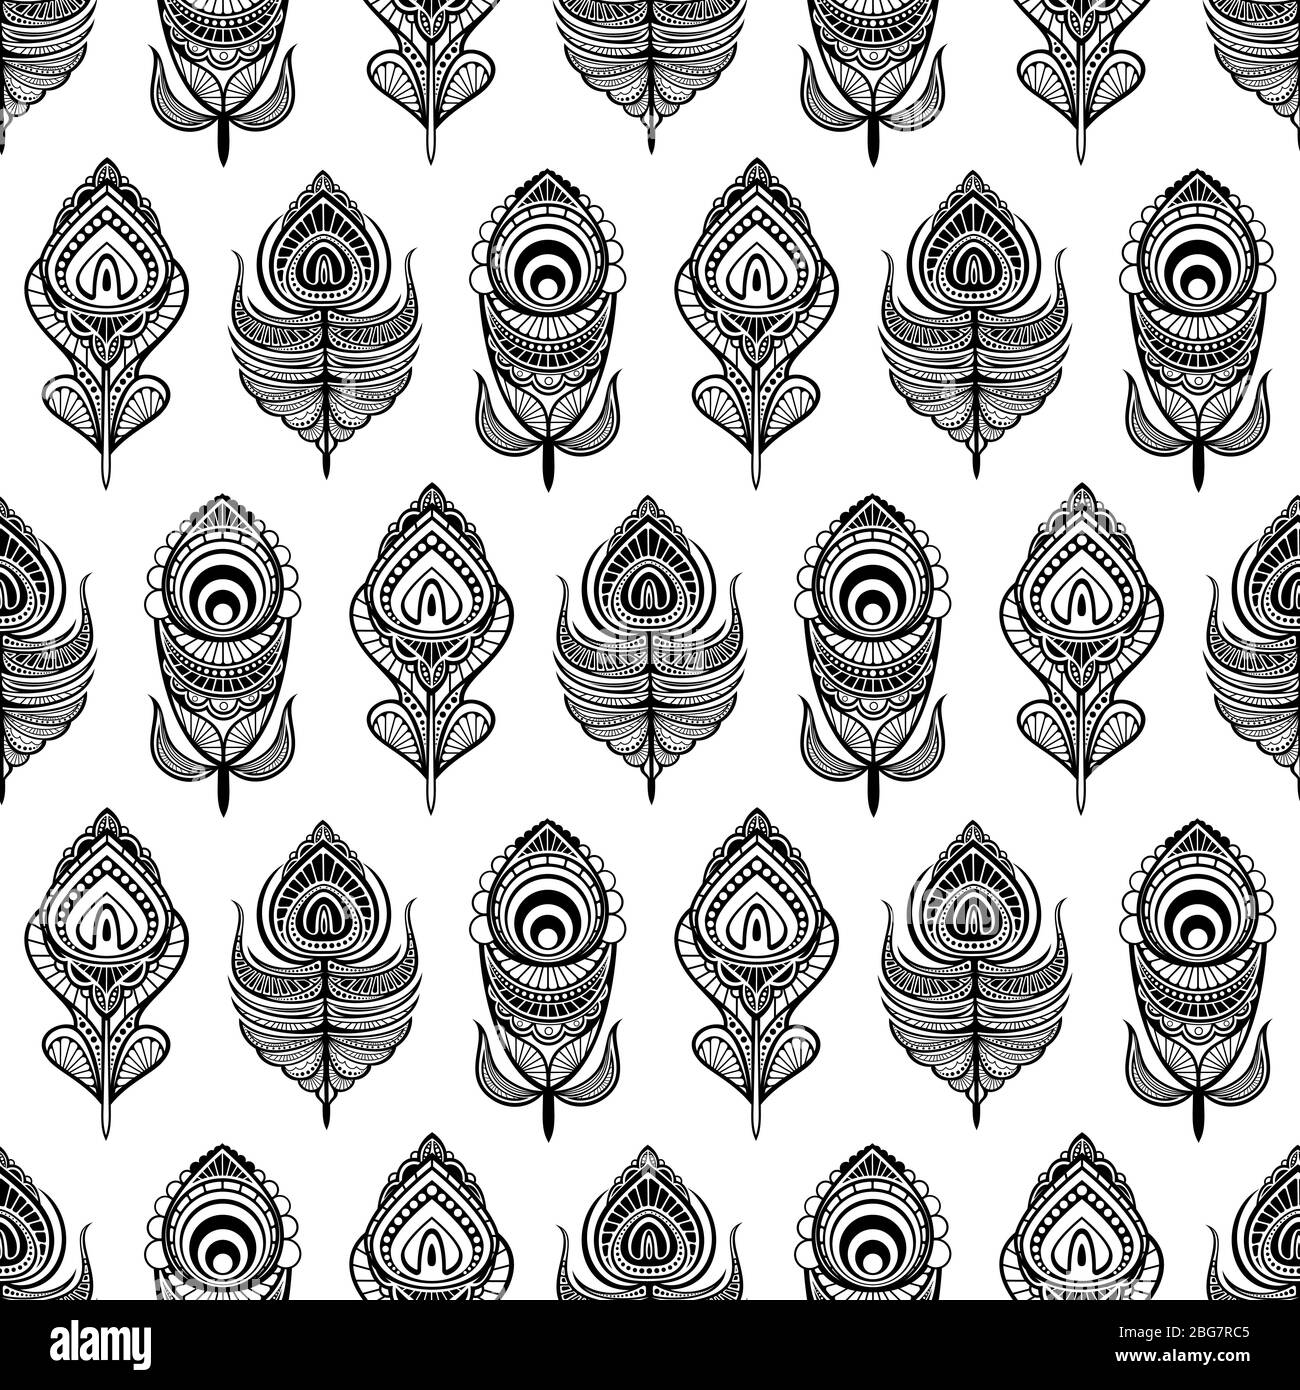 Black and white mandala feathers seamless pattern for print, textile, wallpaper. Vector illustration Stock Vector